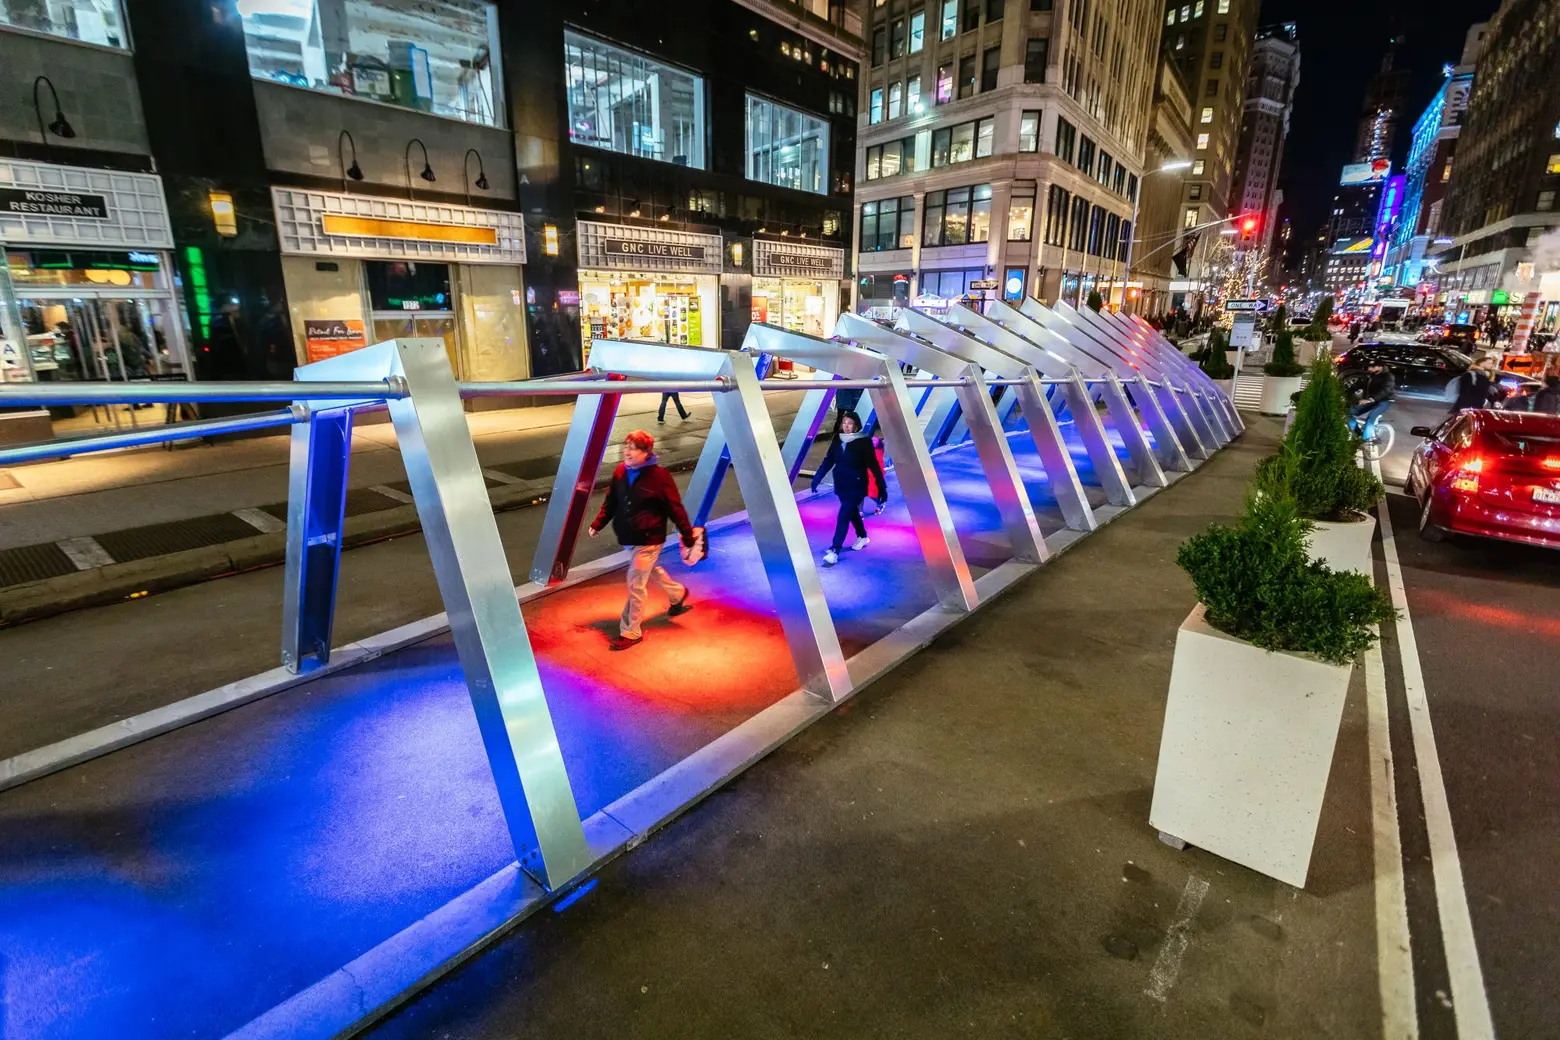 Illuminated Garment District installation ‘Iceberg’ wants you to think about climate change